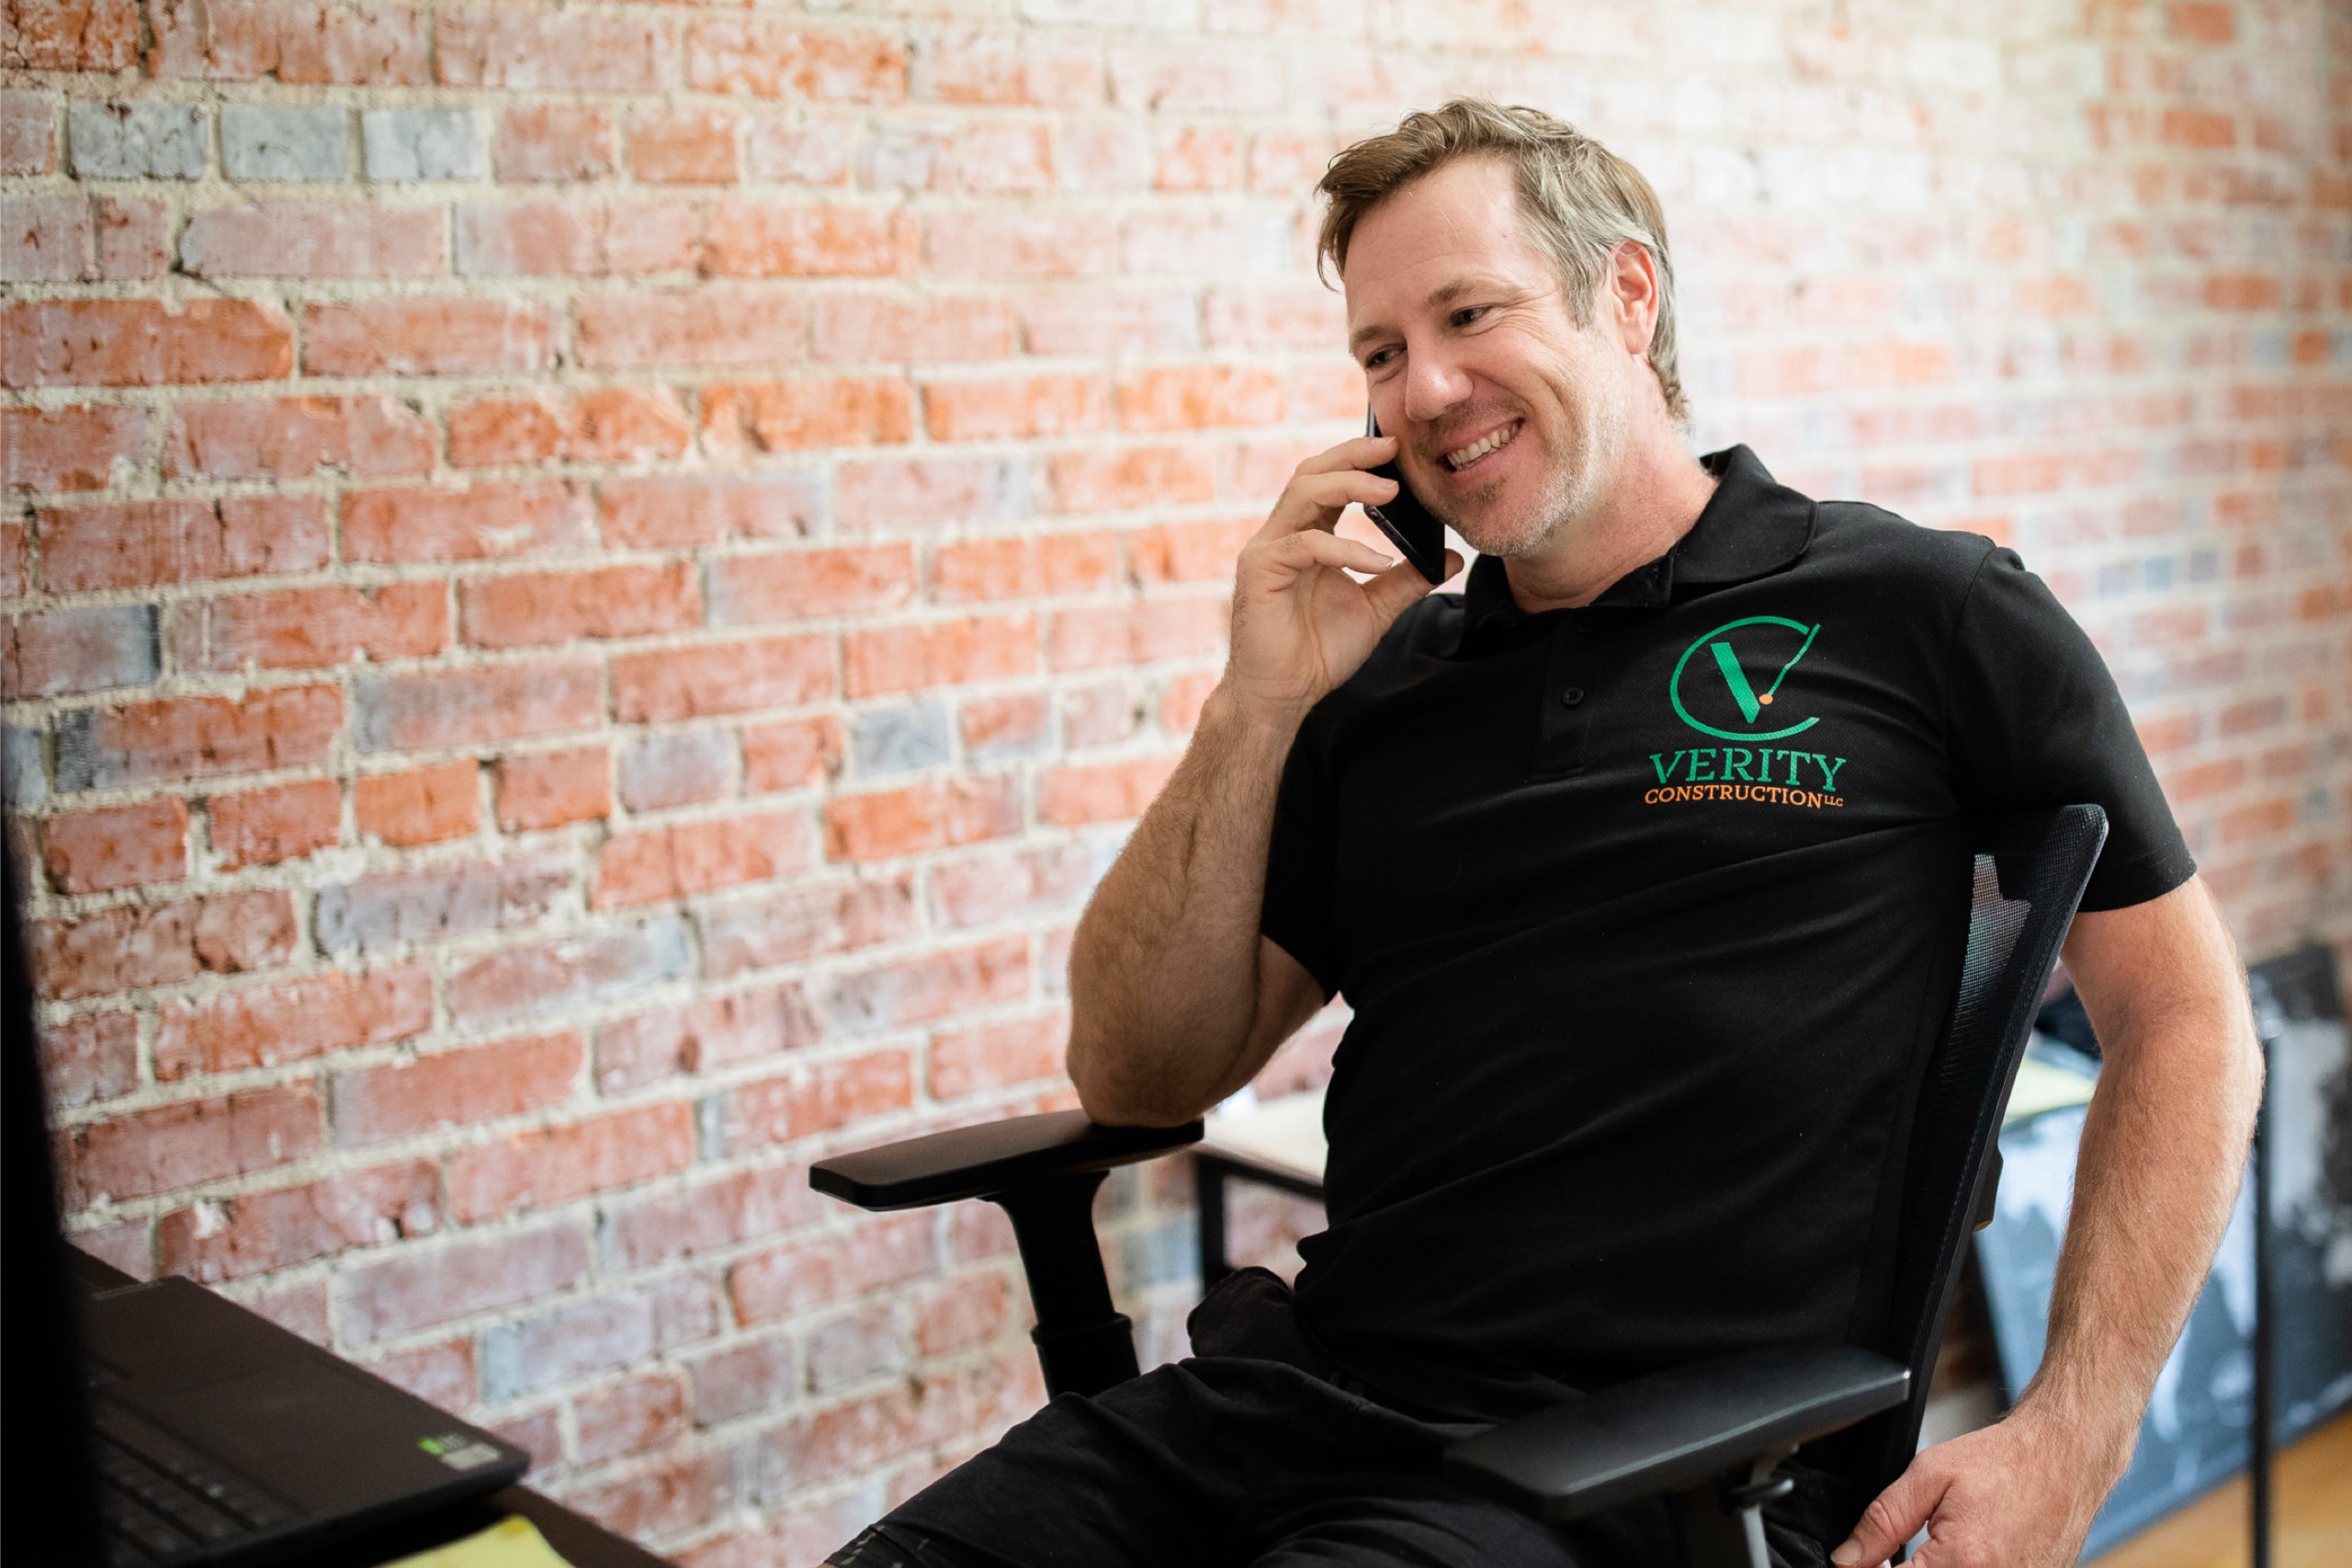 Tim Plankenhorn, founder of Verity Construction, general contractors in Medford, Oregon, taking a phone call in his office